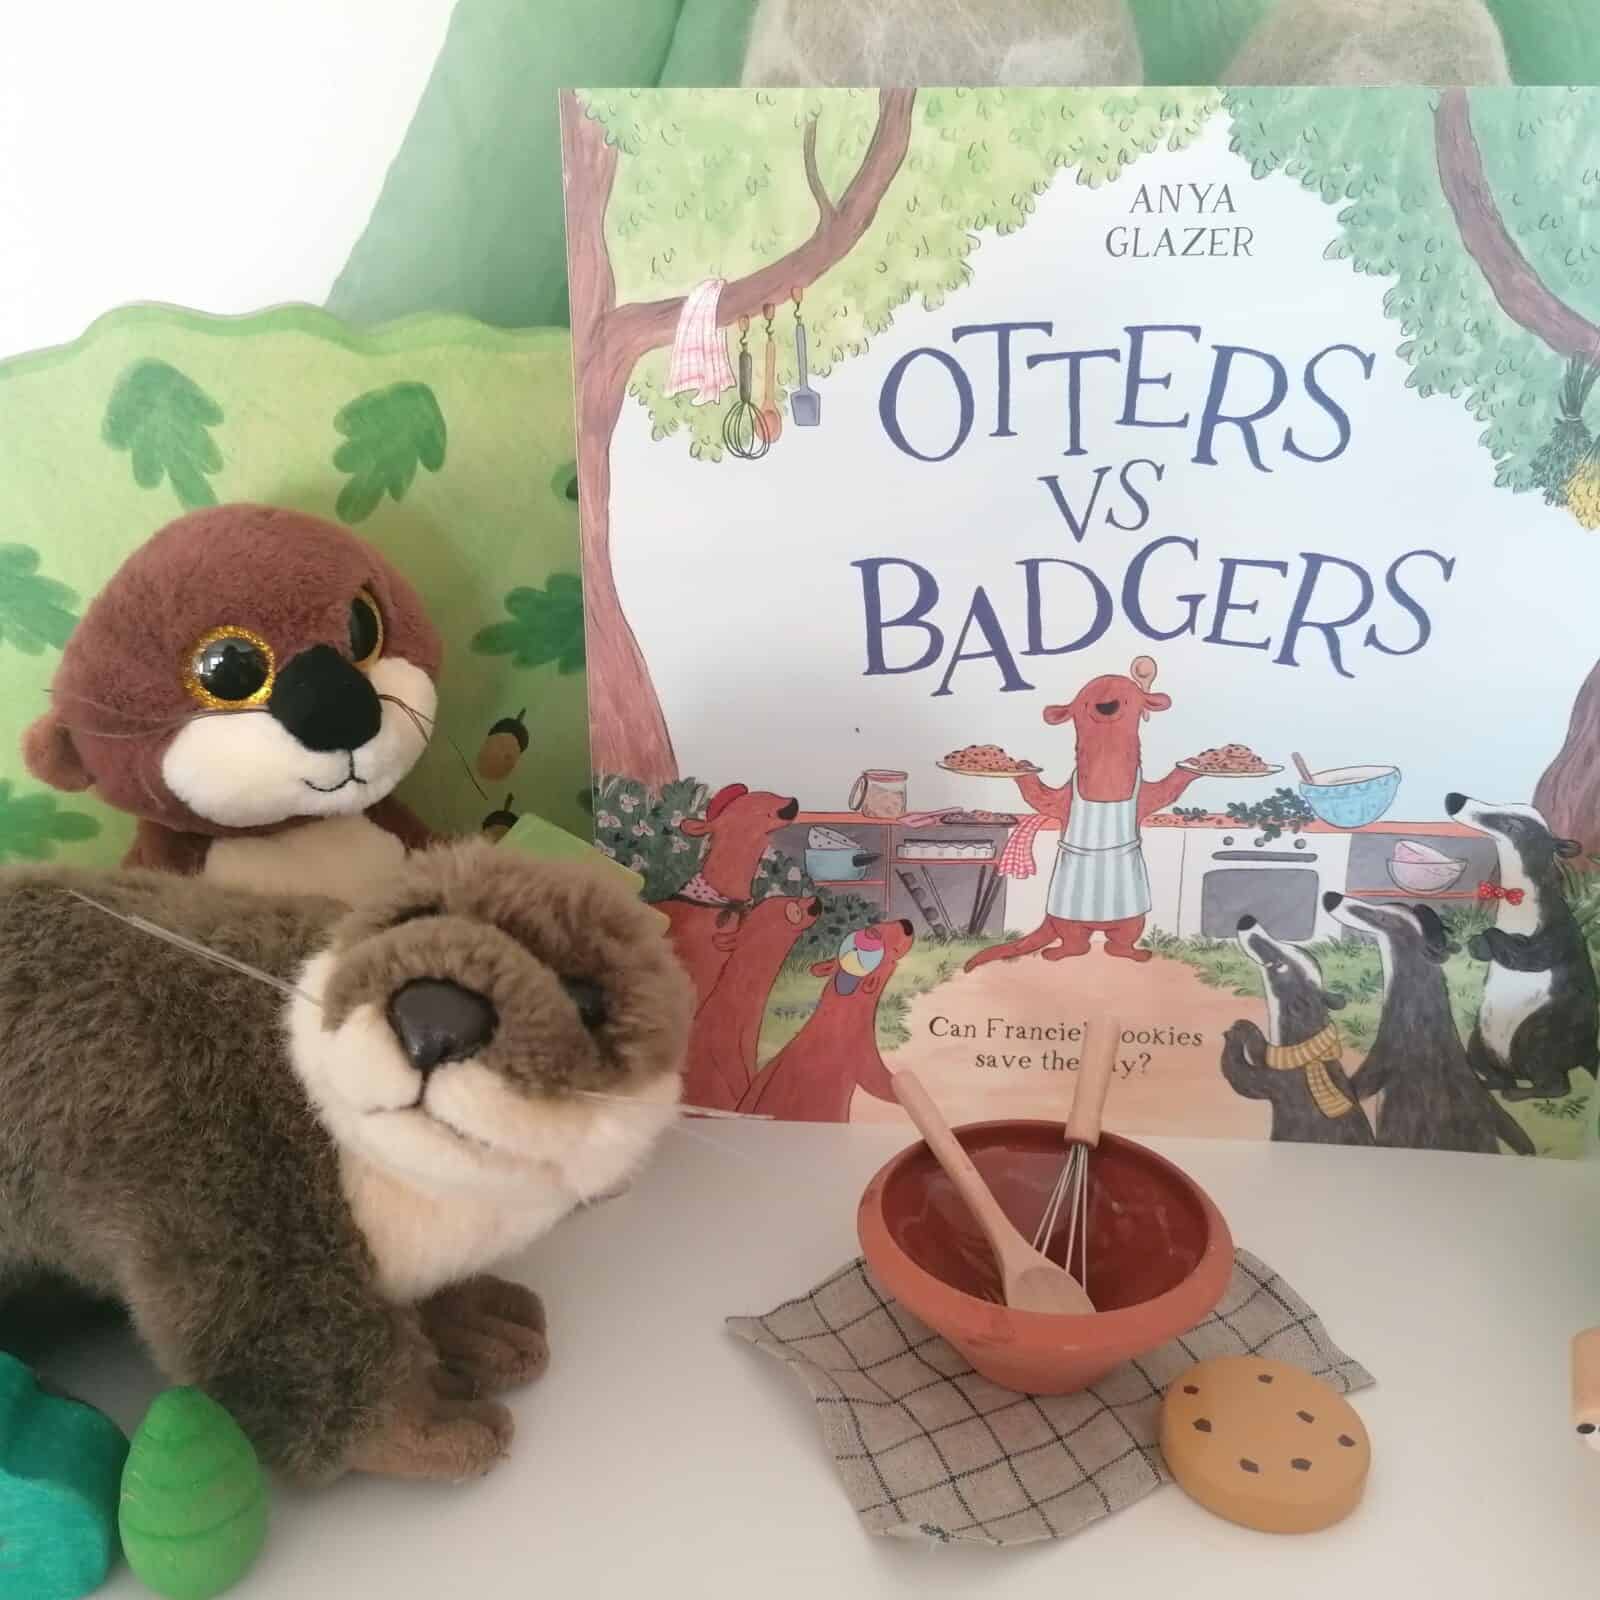 Otters Vs Badgers book with two toy otters and a mini mixing bowl, spoon and whisk